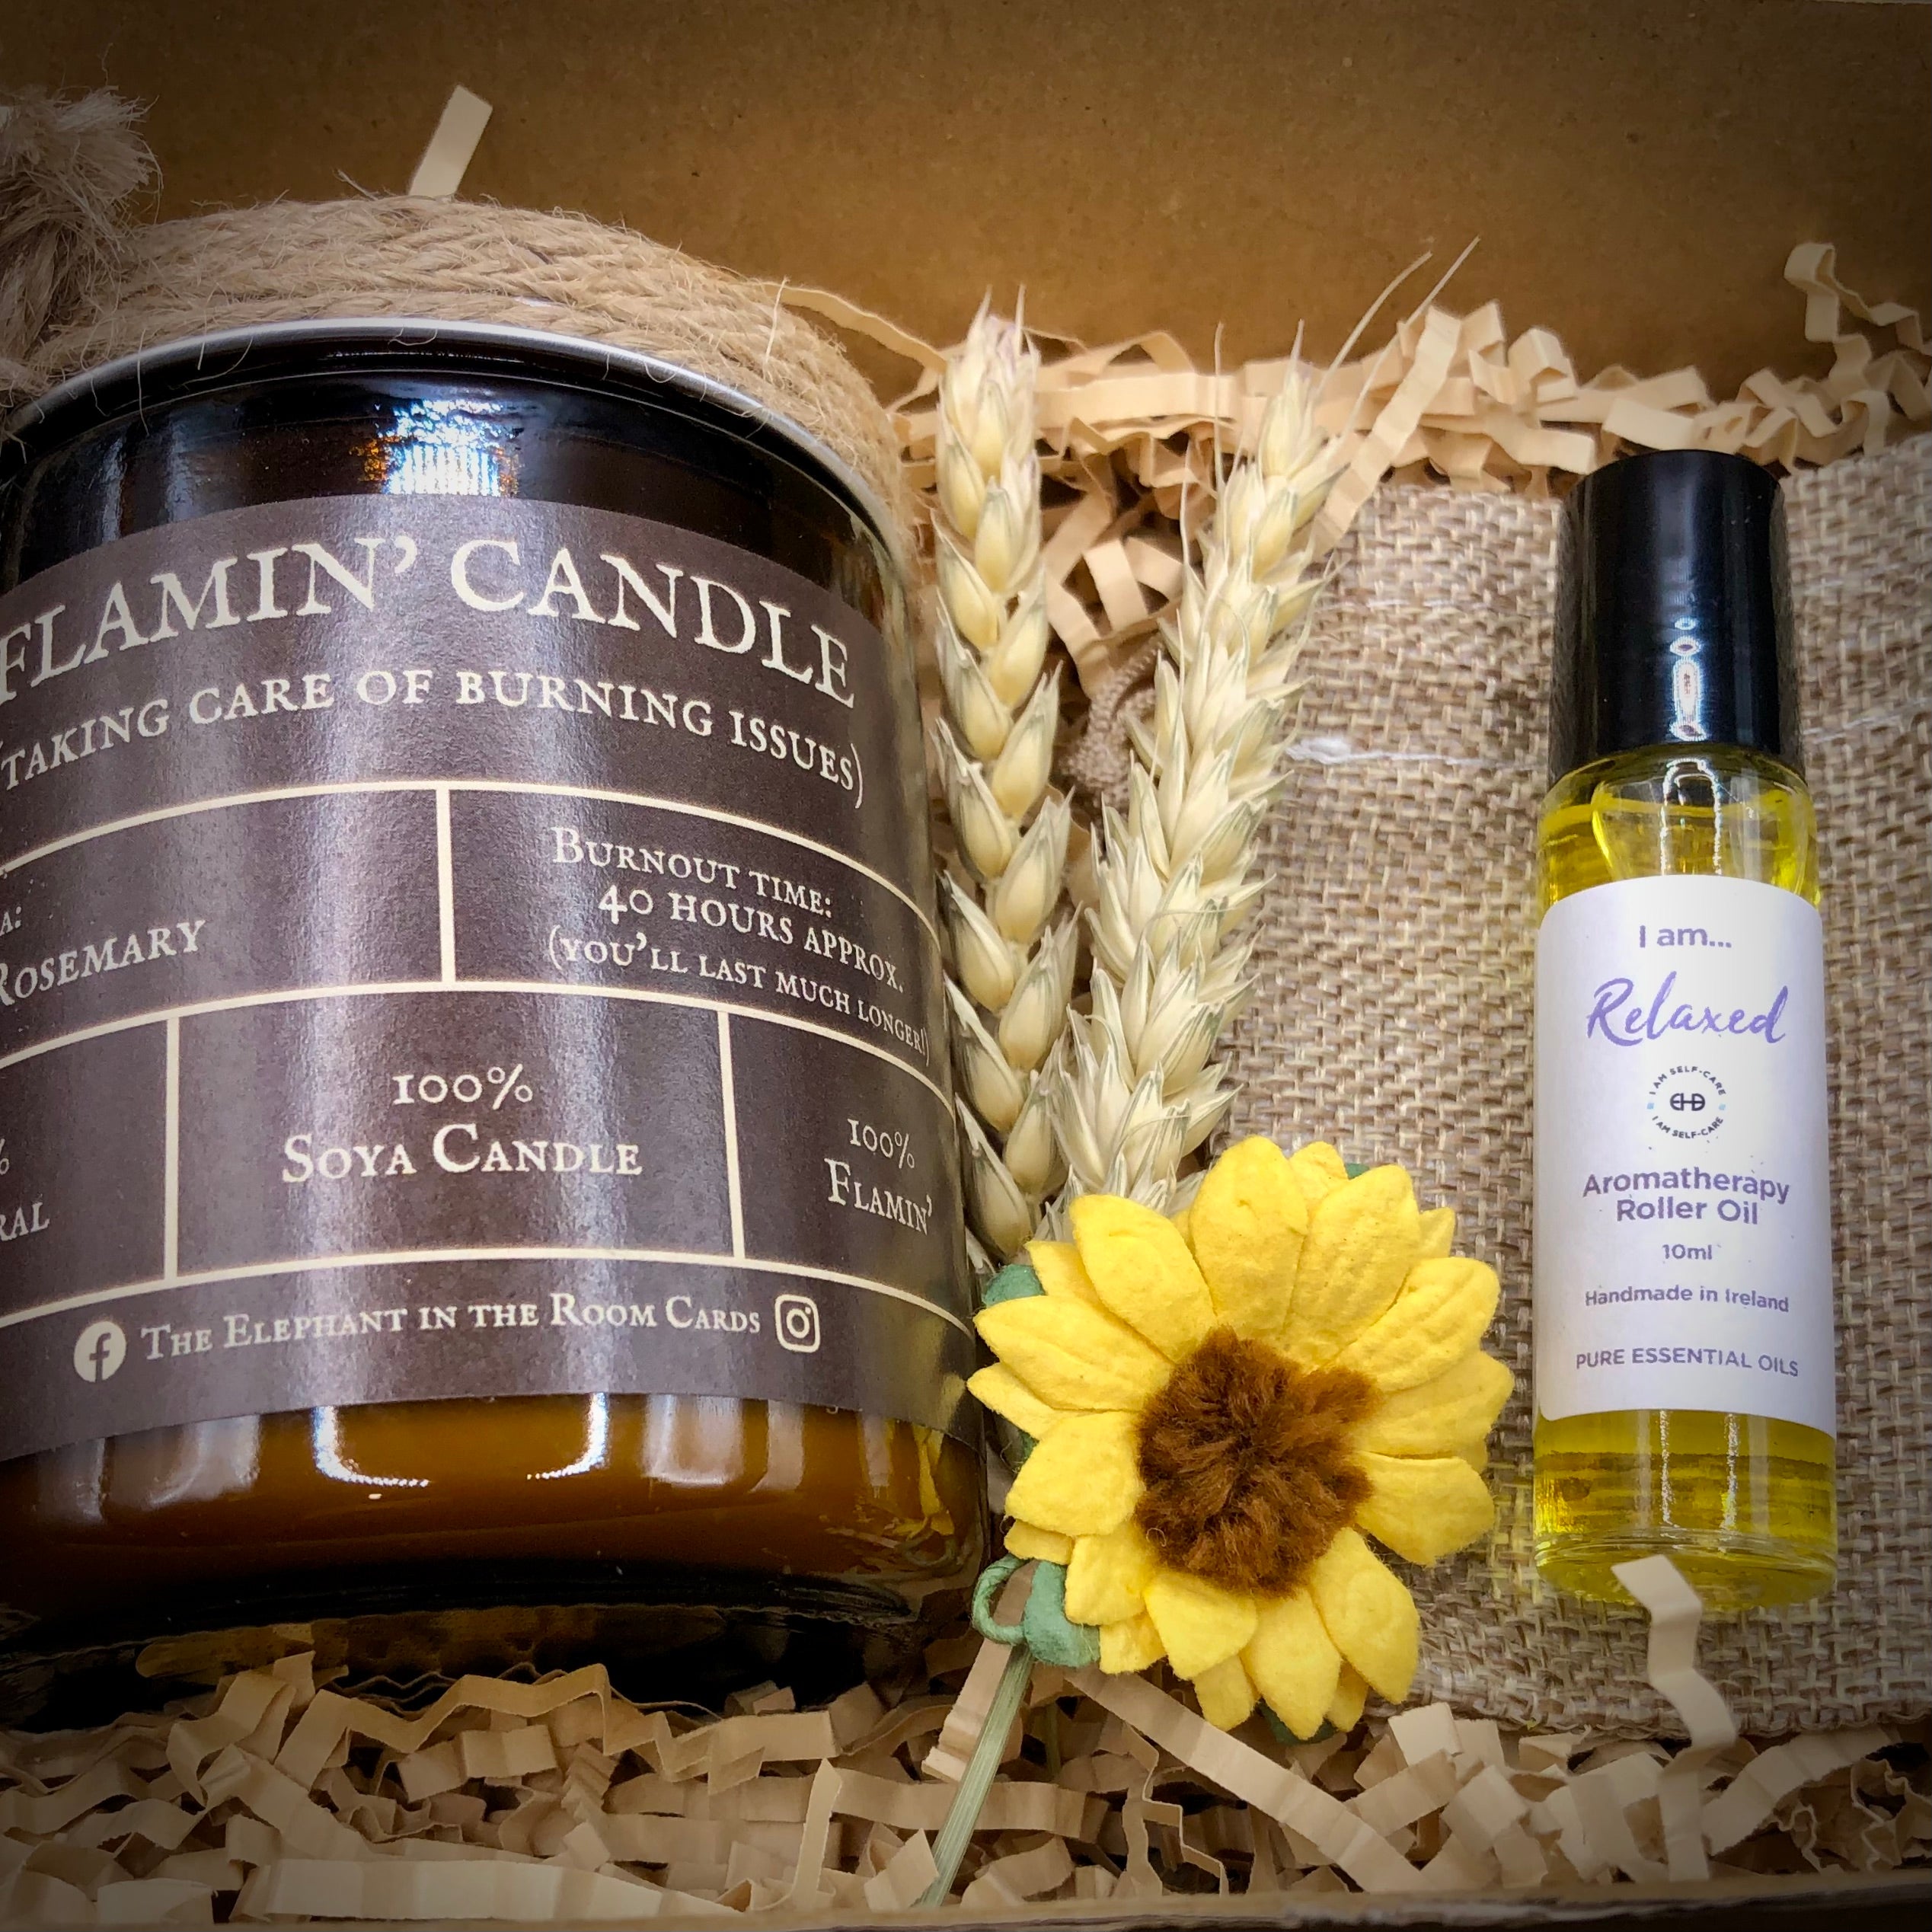 Aromatherapy calming roll on oil and candle gift box